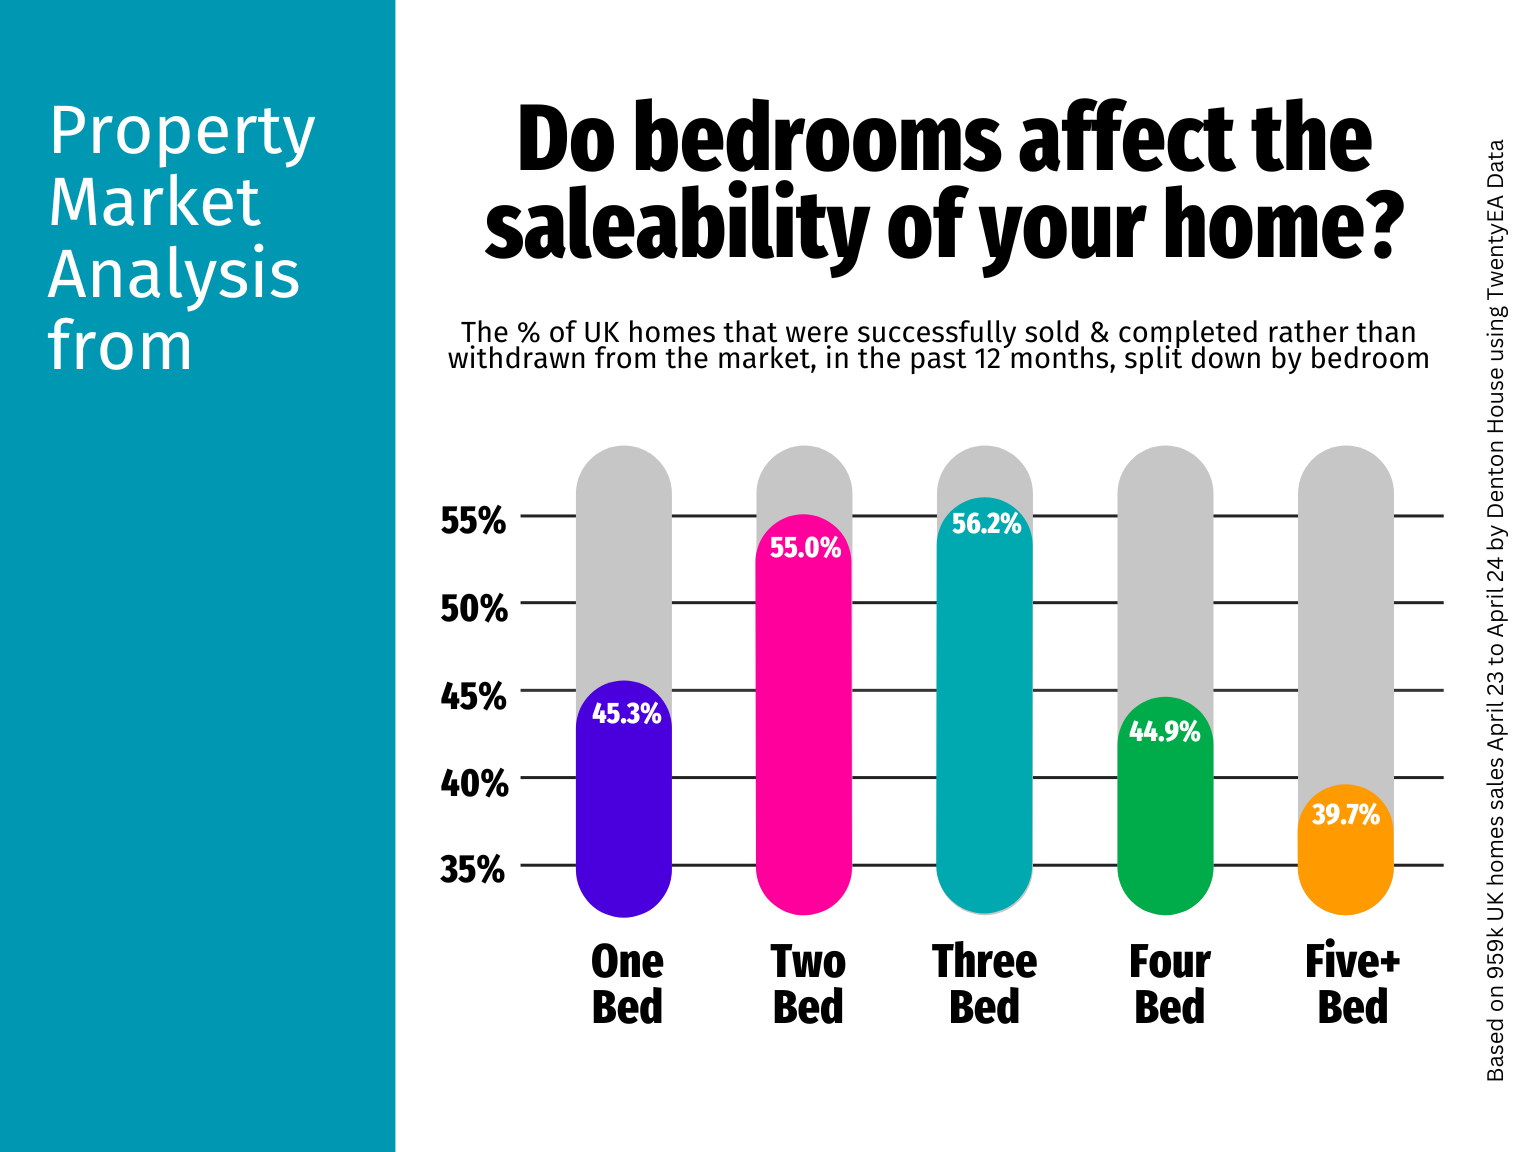 do-bedrooms-affect-the-saleability-of-your-home-graphic-2